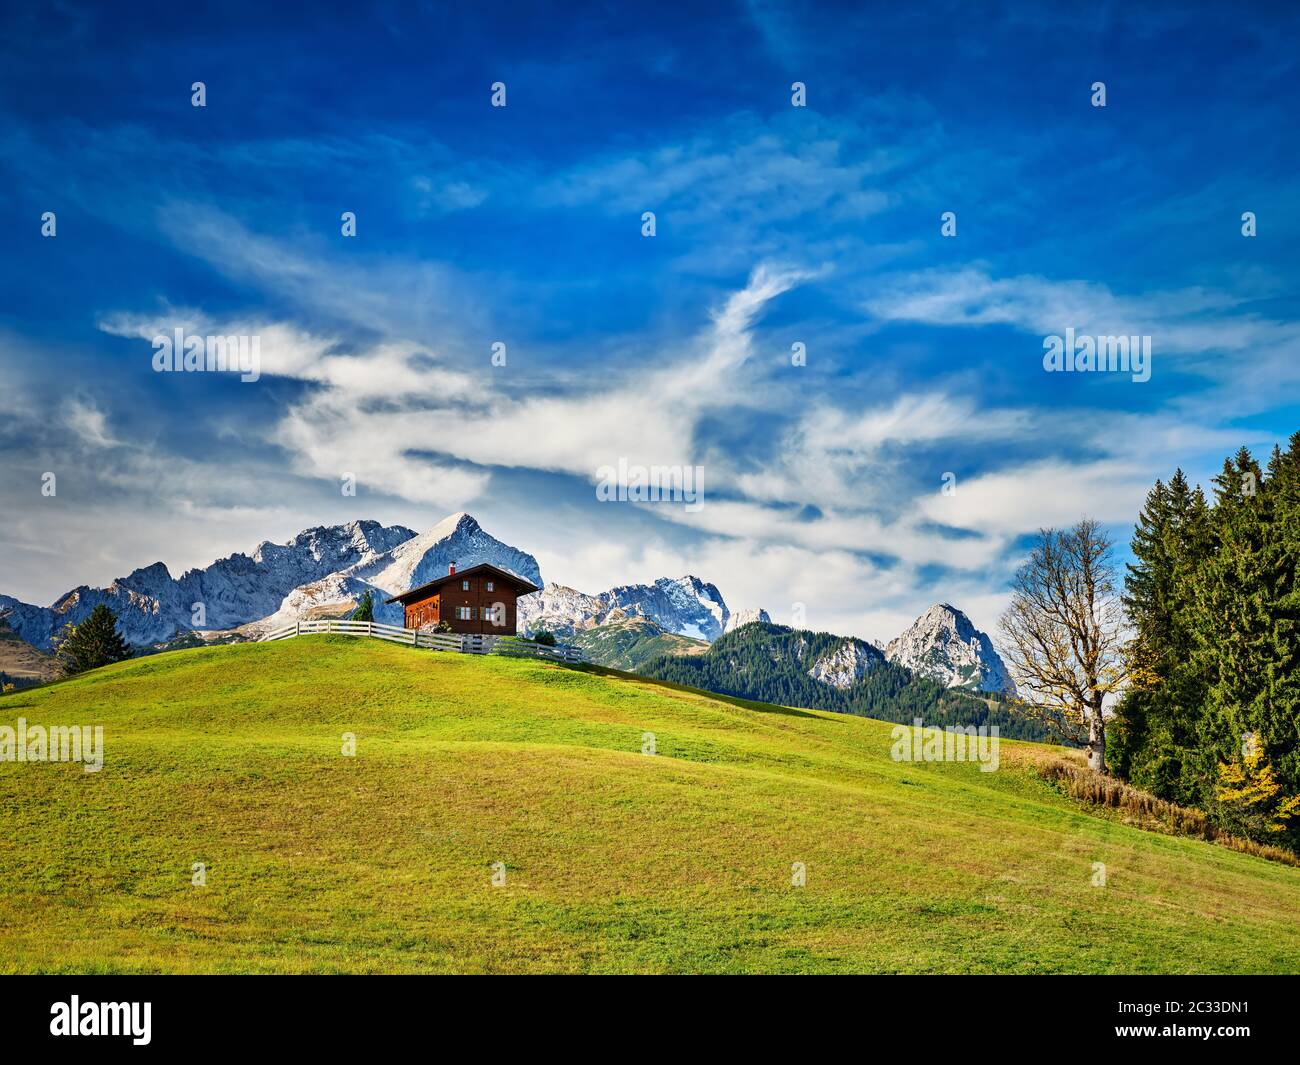 Chalet on a meadow at the mountain Eckbauer with alps in background on a sunny day near Garmisch-Partenkirchen, Germany Stock Photo